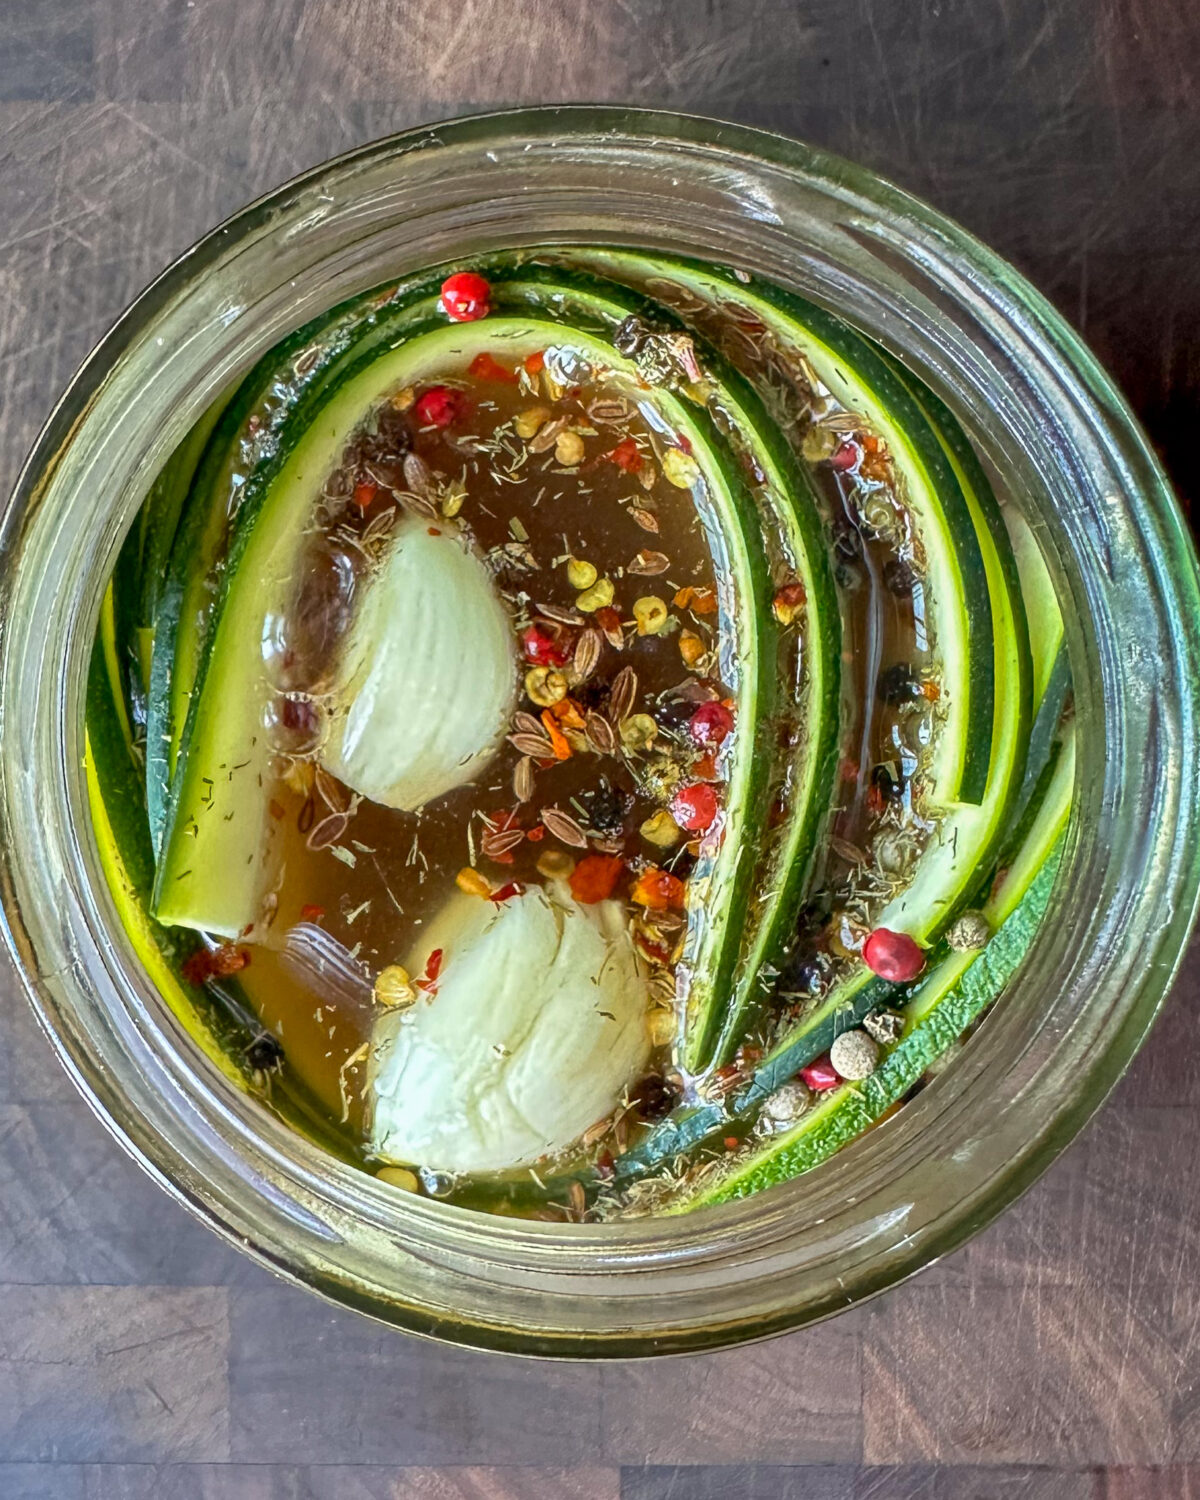 Pack zucchini and onion into the jar, wrapping the zucchini around the side of the jar and dropping the onions into the middle of the jar.